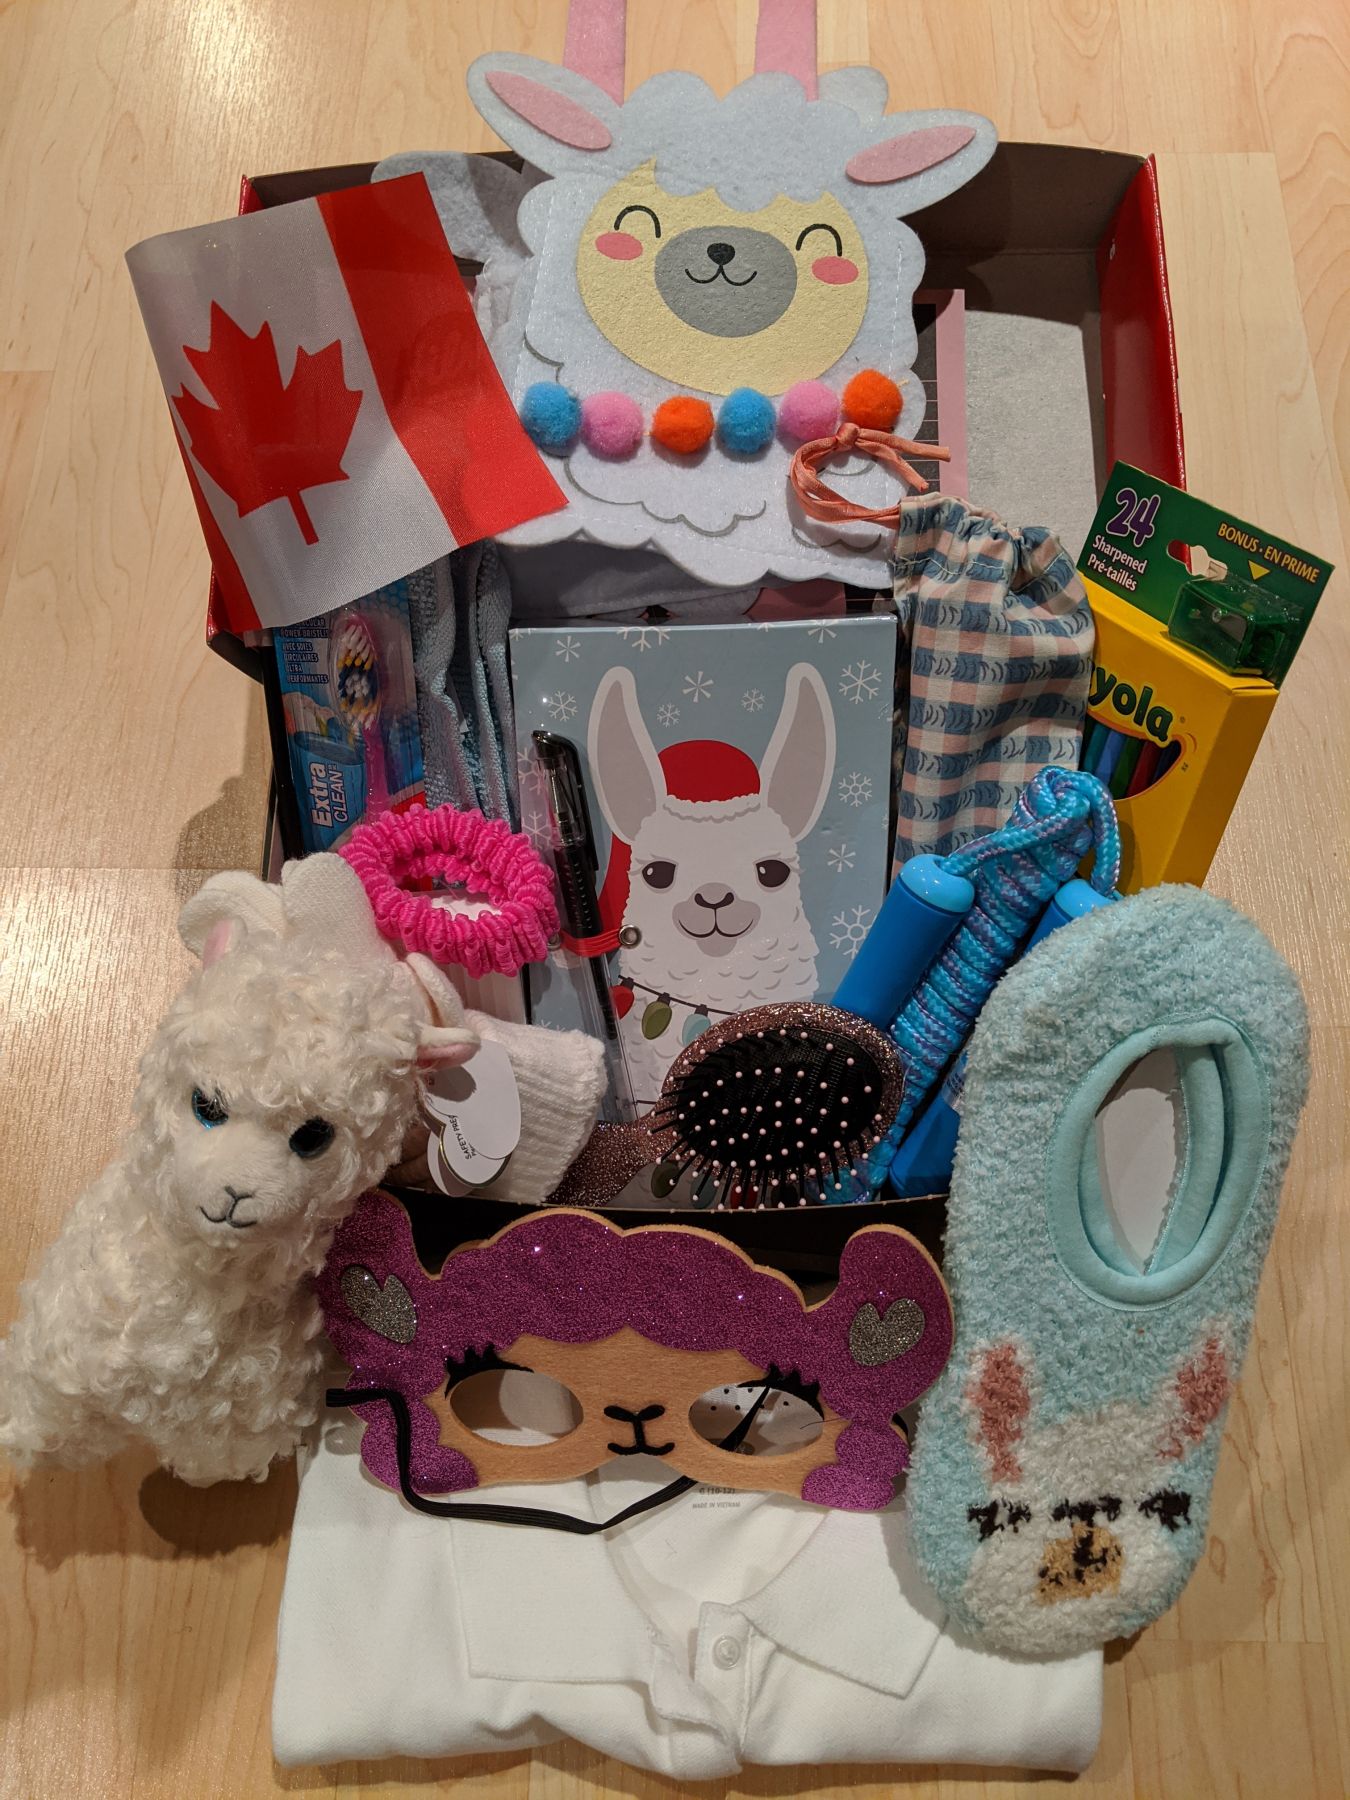 Julie packed this fun alpaca themed shoebox, which is sure to become a priceless treasure for the child who receives it!